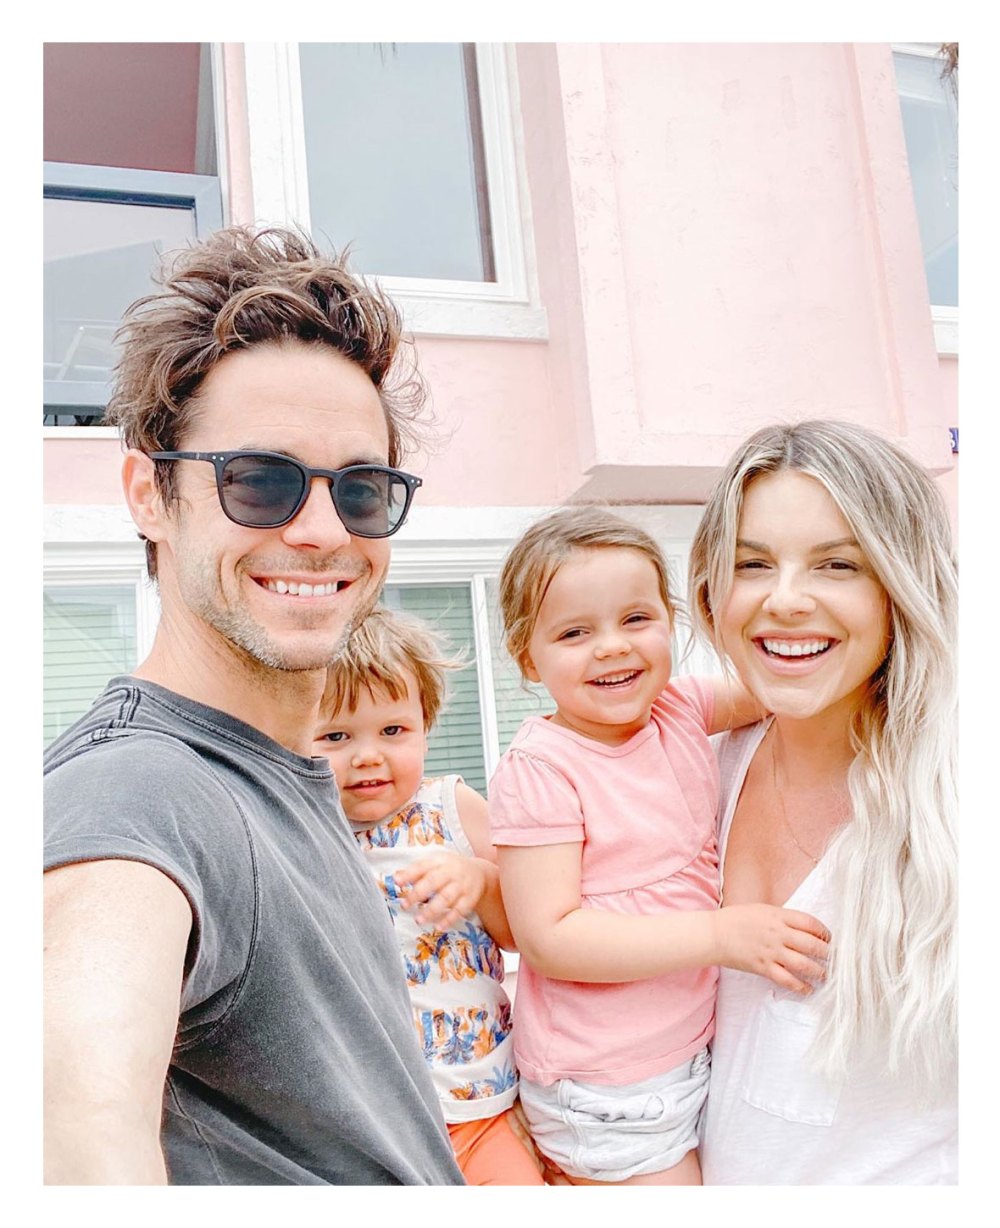 Ali Fedotowsky Reveals She Suffered Miscarriage